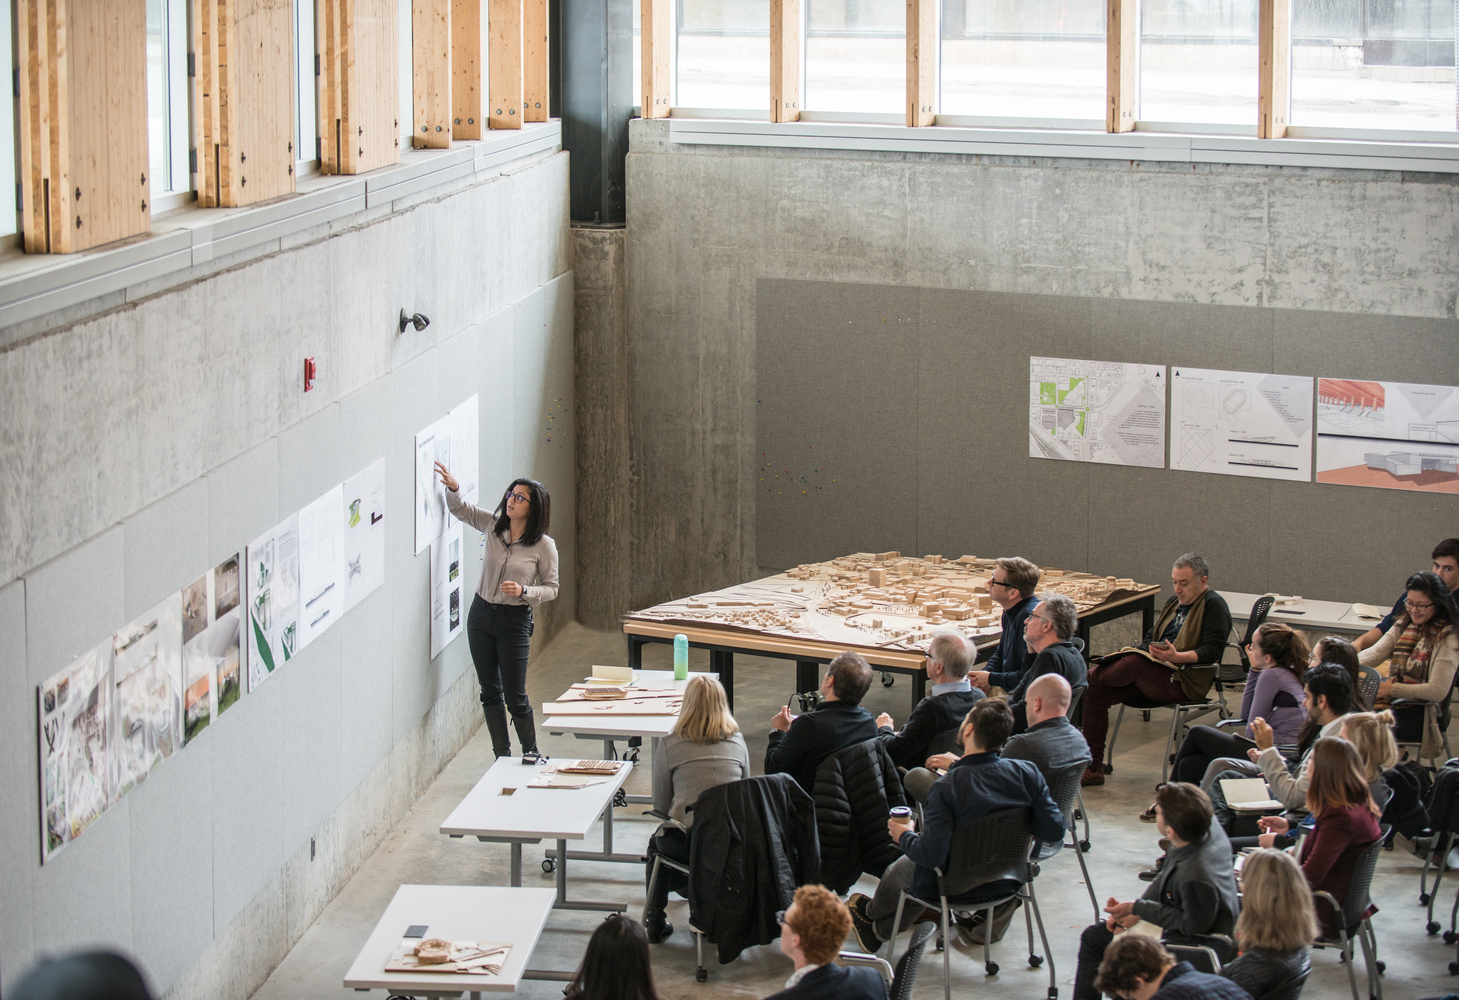 Photograph of a student presenting a poster to an audience in the McEwen School of Architecture's crit pit